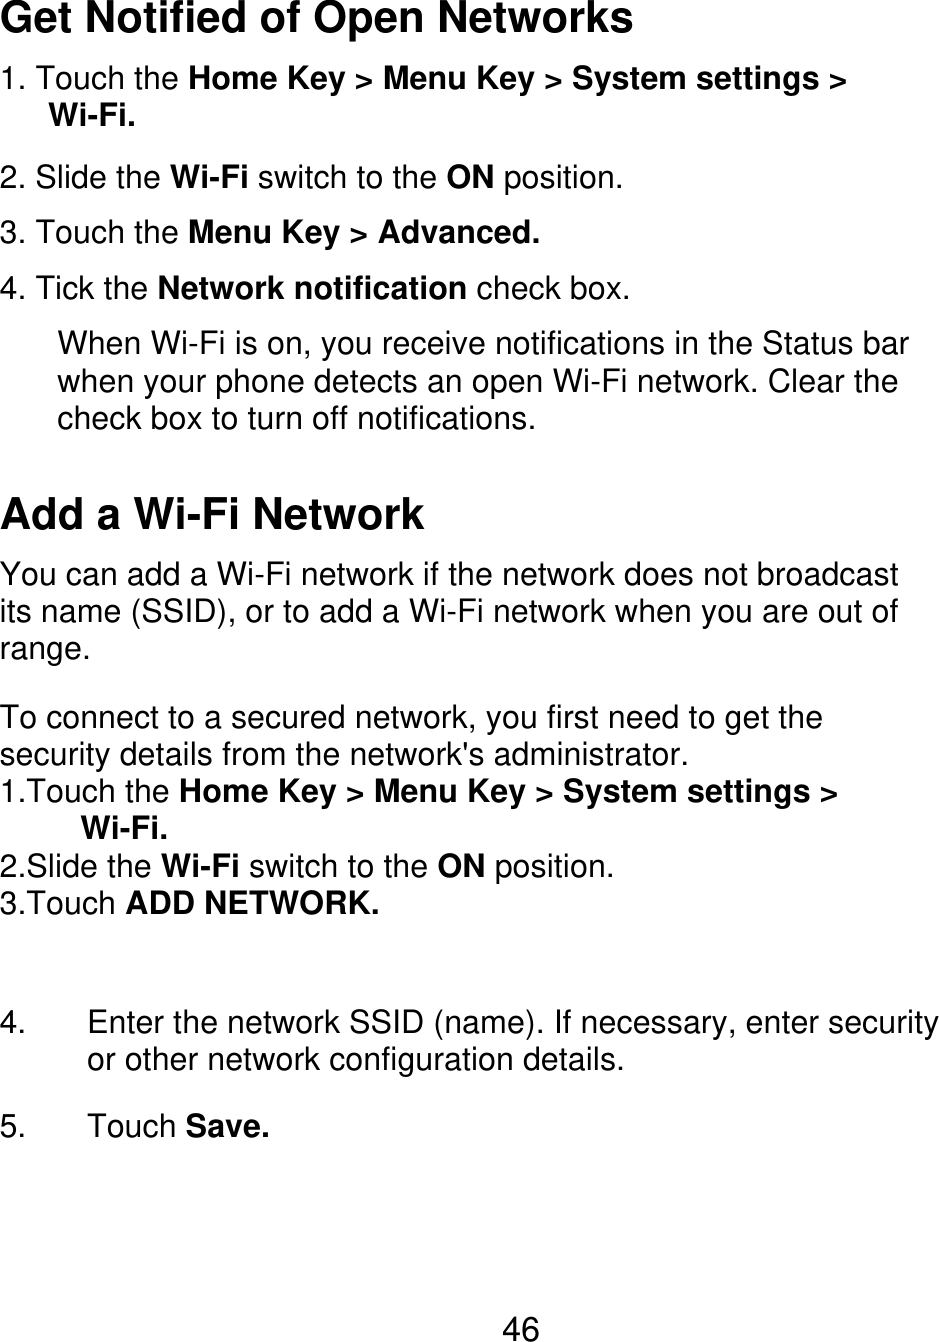 Get Notified of Open Networks 1. Touch the Home Key &gt; Menu Key &gt; System settings &gt;    Wi-Fi. 2. Slide the Wi-Fi switch to the ON position. 3. Touch the Menu Key &gt; Advanced. 4. Tick the Network notification check box. When Wi-Fi is on, you receive notifications in the Status bar when your phone detects an open Wi-Fi network. Clear the check box to turn off notifications. Add a Wi-Fi Network You can add a Wi-Fi network if the network does not broadcast its name (SSID), or to add a Wi-Fi network when you are out of range. To connect to a secured network, you first need to get the security details from the network&apos;s administrator. 1.Touch the Home Key &gt; Menu Key &gt; System settings &gt;      Wi-Fi. 2.Slide the Wi-Fi switch to the ON position. 3.Touch ADD NETWORK. 4. 5. Enter the network SSID (name). If necessary, enter security or other network configuration details. Touch Save. 46 